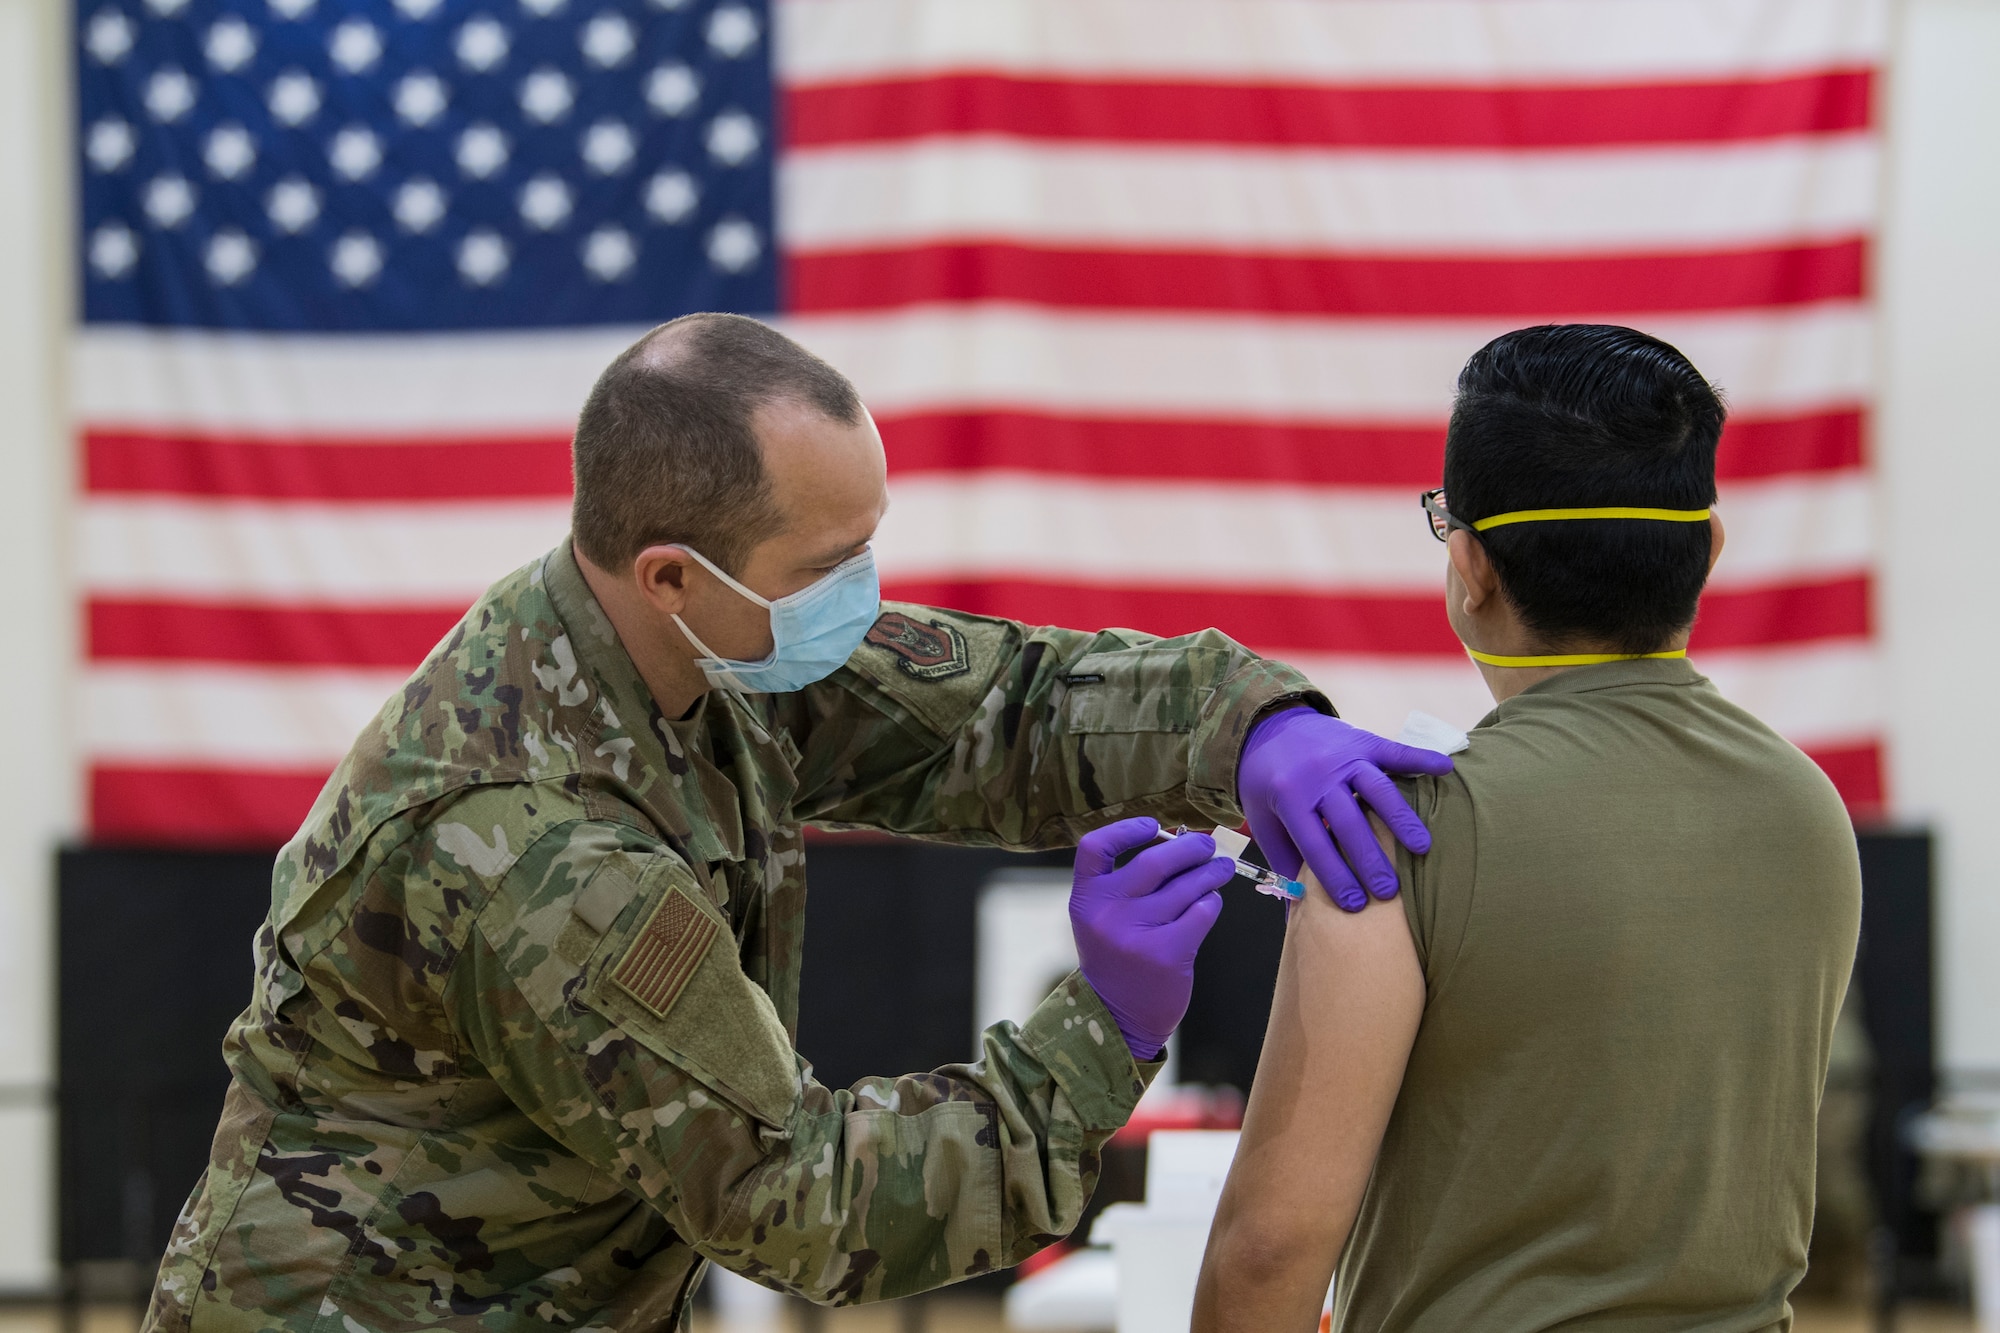 U.S. Air Force 2nd Lt. James Black, a clinical nurse with the 514th Aerospace Medicine Squadron, 514th Air Mobility Wing, administers a COVID-19 vaccine to Tech Sgt. David Bettetta, and optometry specialist with the 514 AMDS at Joint Base McGuire-Dix-Lakehurst, N.J., on Jan. 9, 2021.